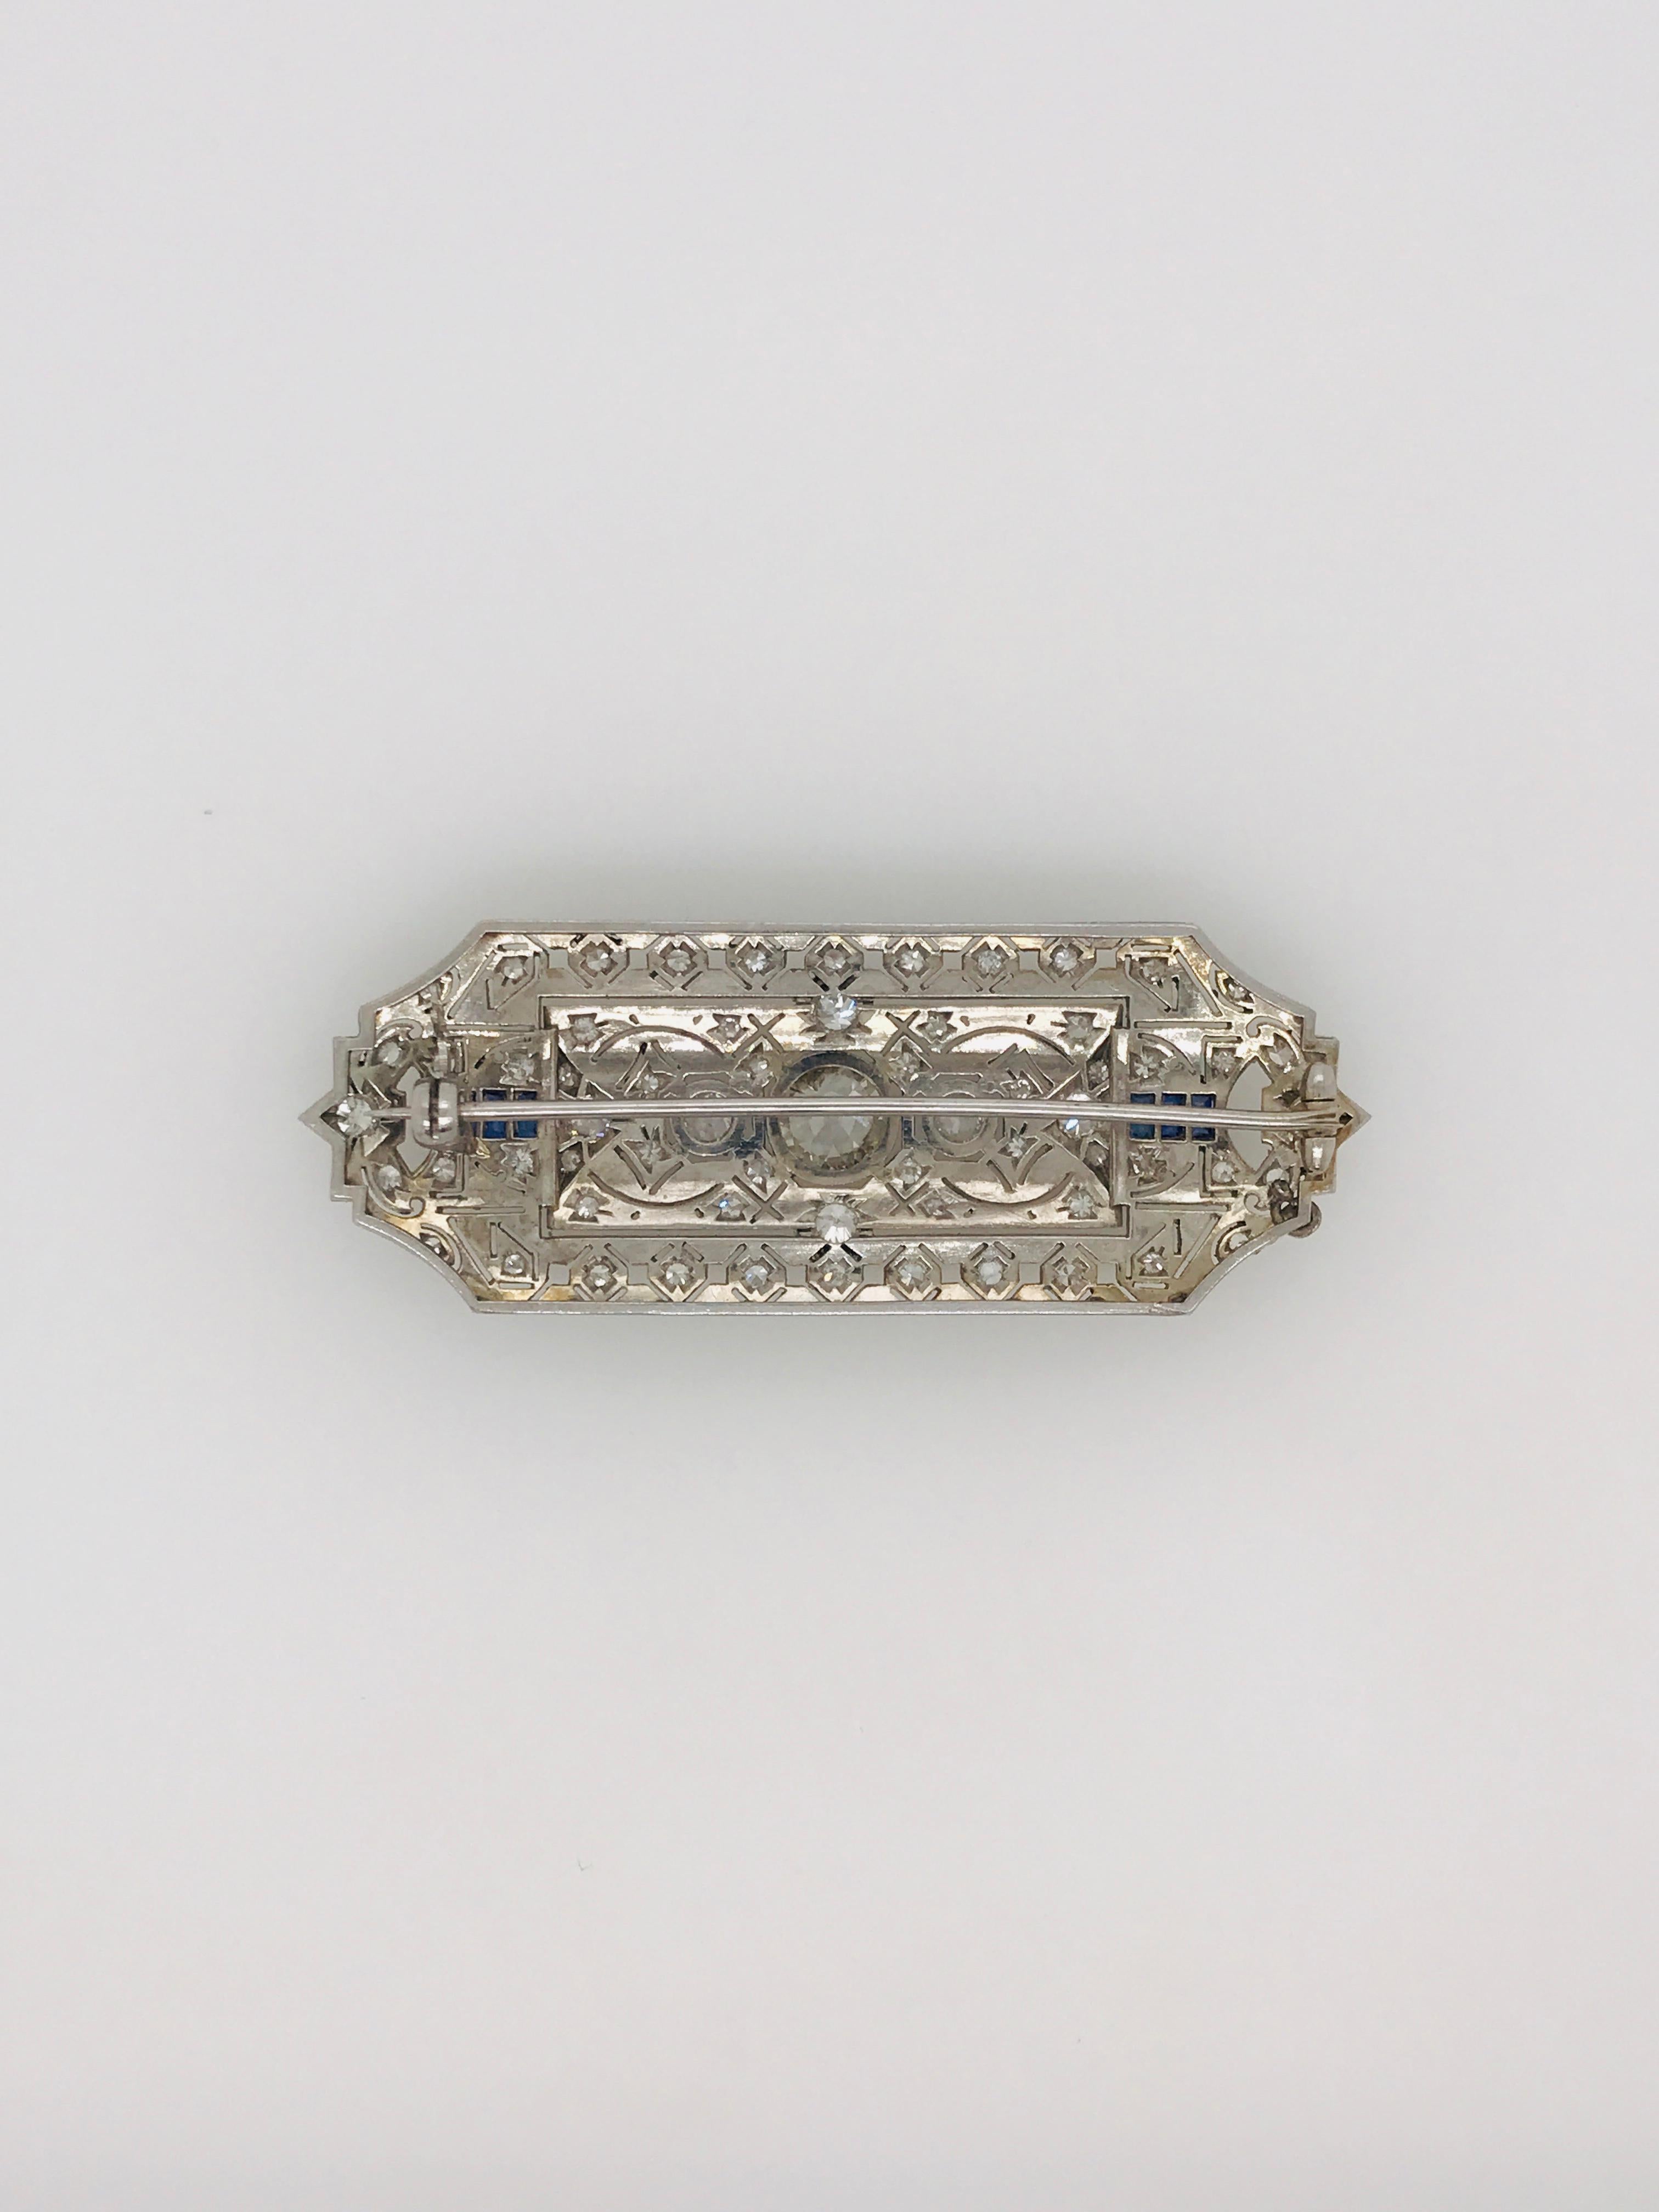 Original Edwardian Diamond And Sapphire Hand Pierced Brooch With Millegrained Borders.
There are 64 old cut diamonds with a total weight of approximately 3.10ct and 6 scissor cut sapphires set in platinum.
There is a 1.35ct I/J P1 old cut diamond in